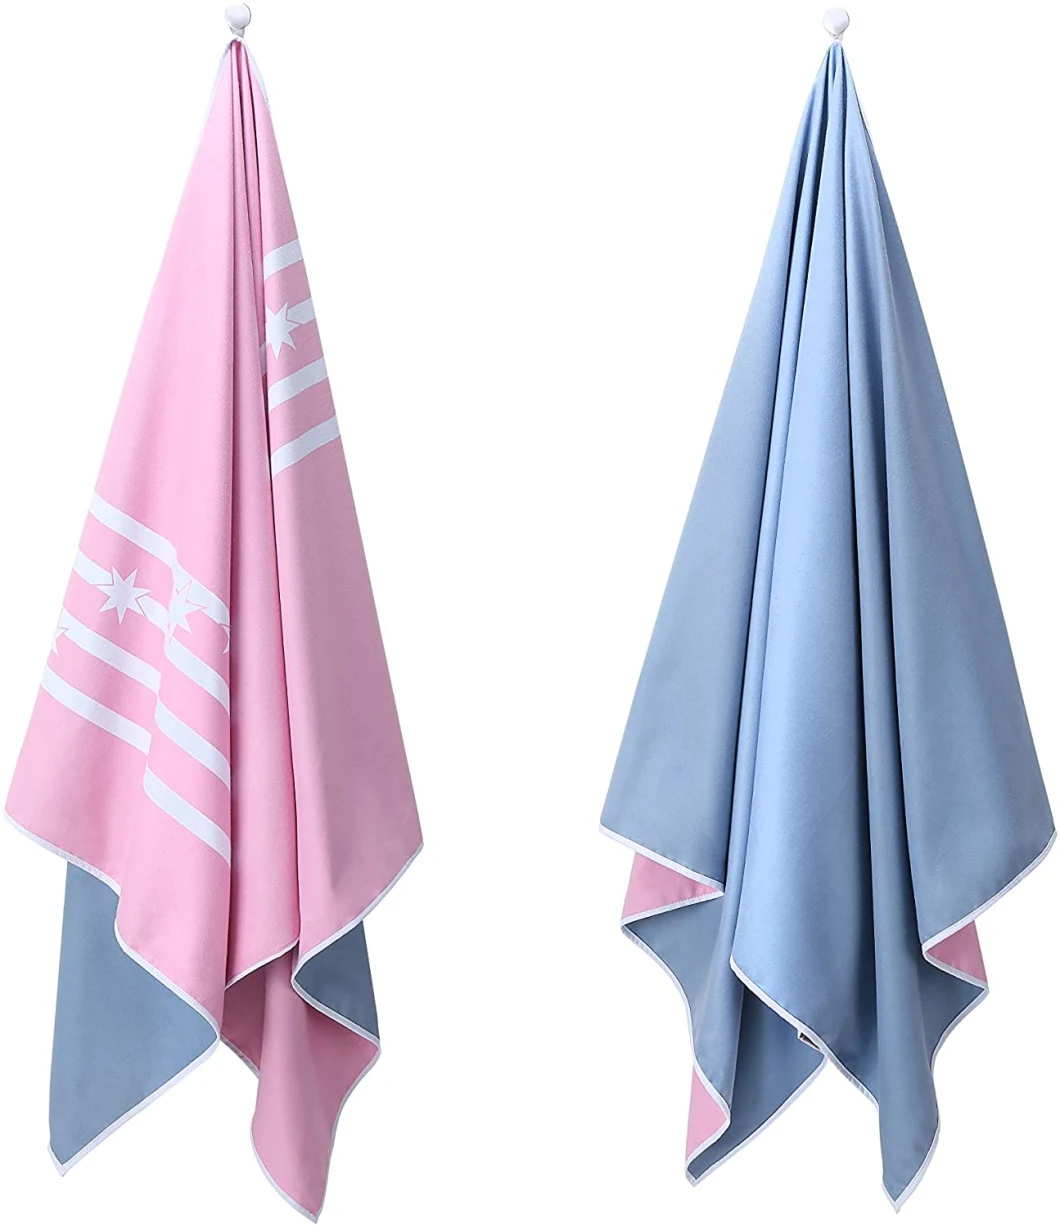 Microfibre Beach Towels for Beach, Pool, Gym, Travel, Yoga, Camping & Hiking, and Gift